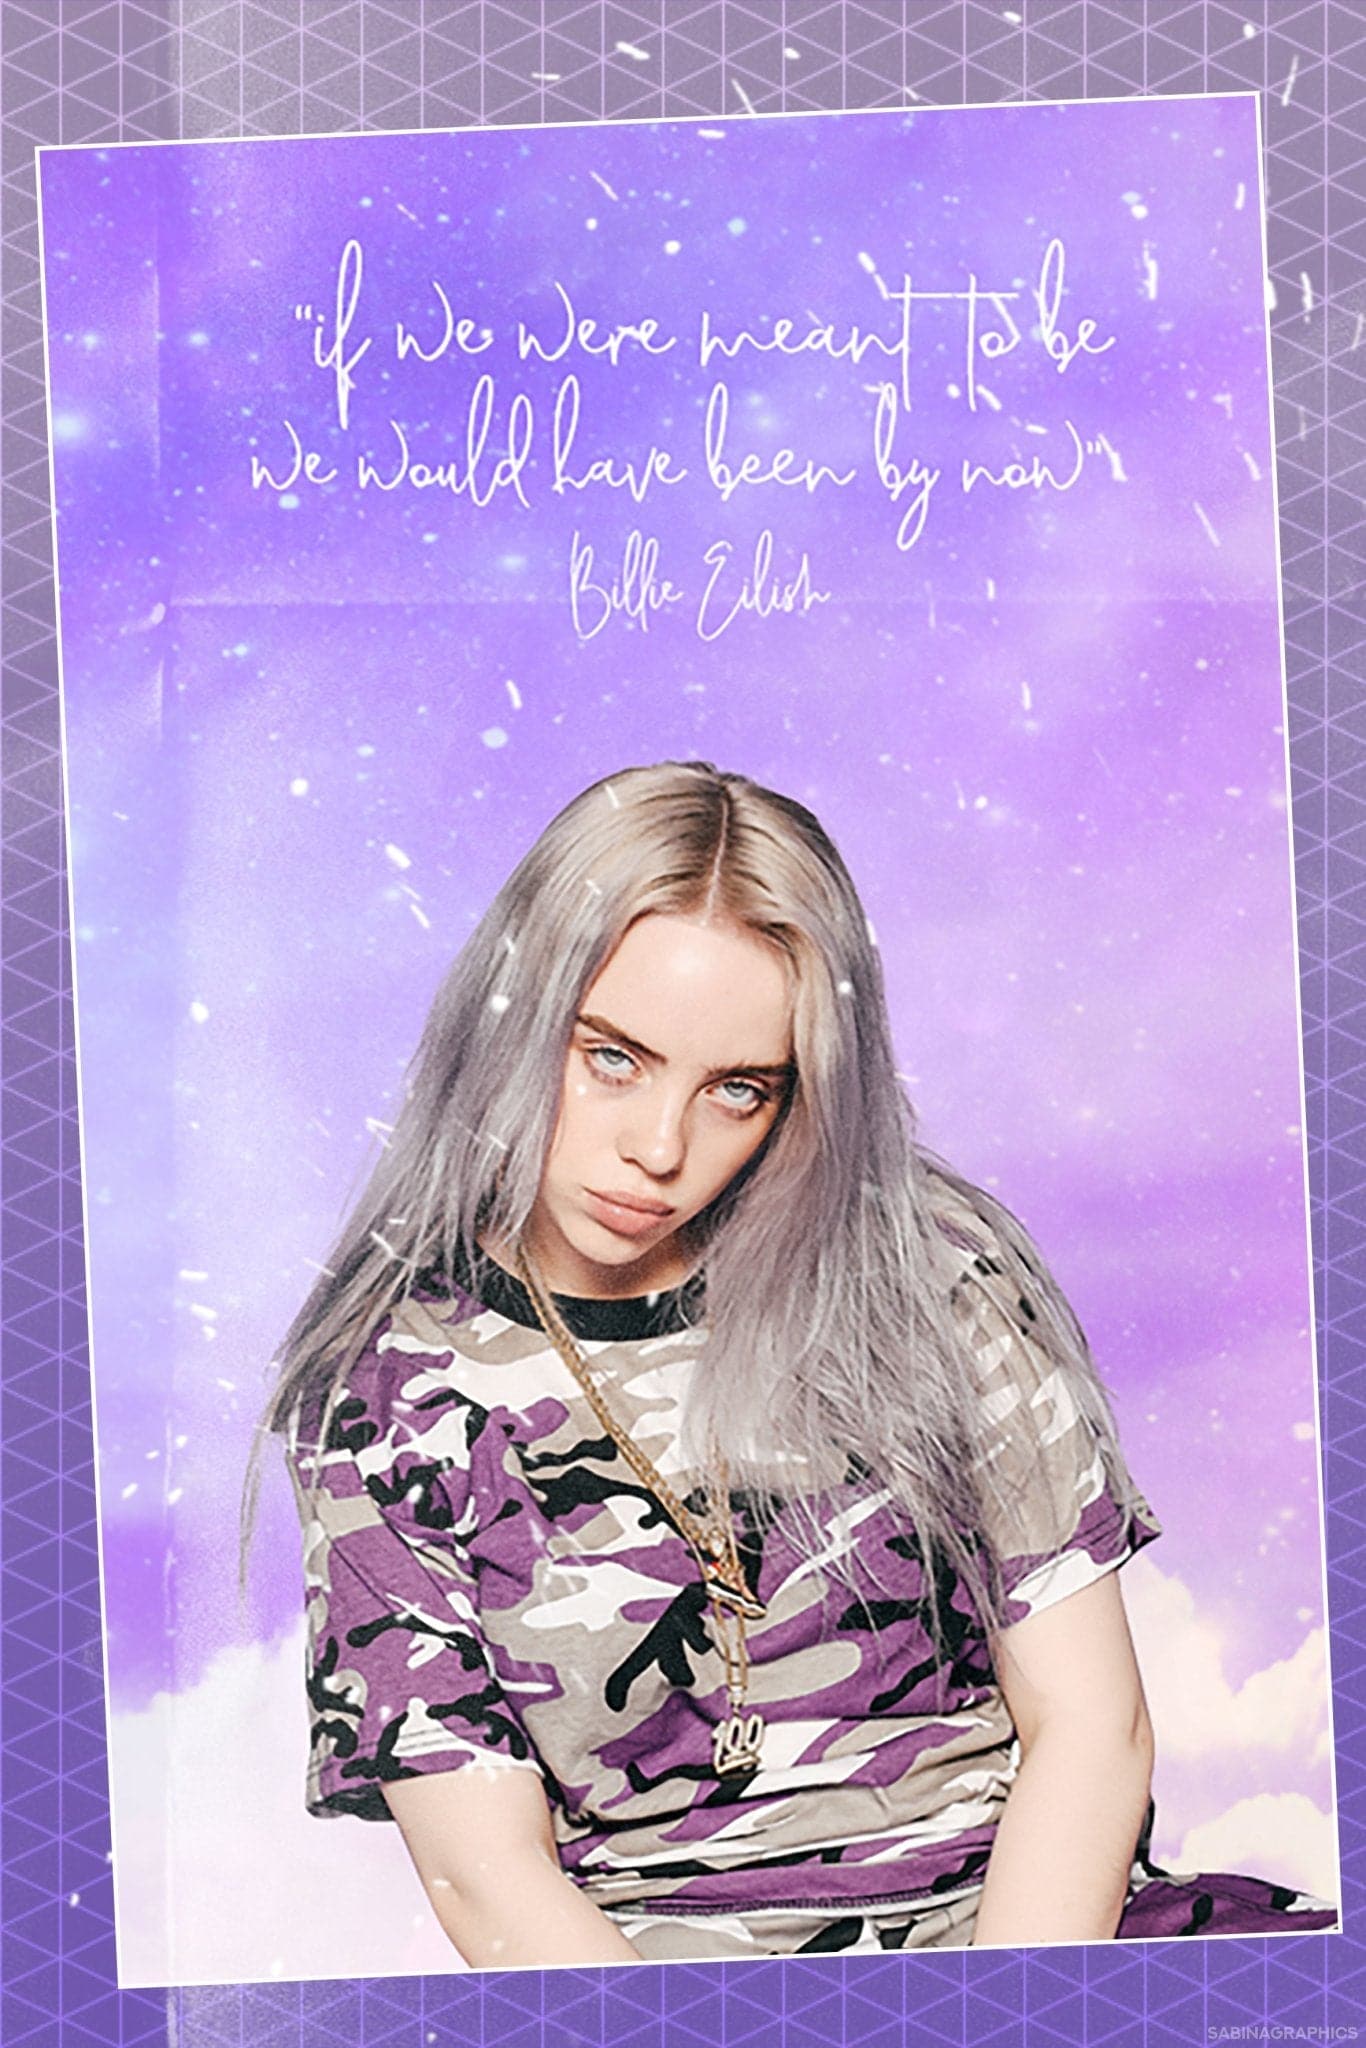 Billie Eilish ‘Would Have Been’ Poster - Posters Plug